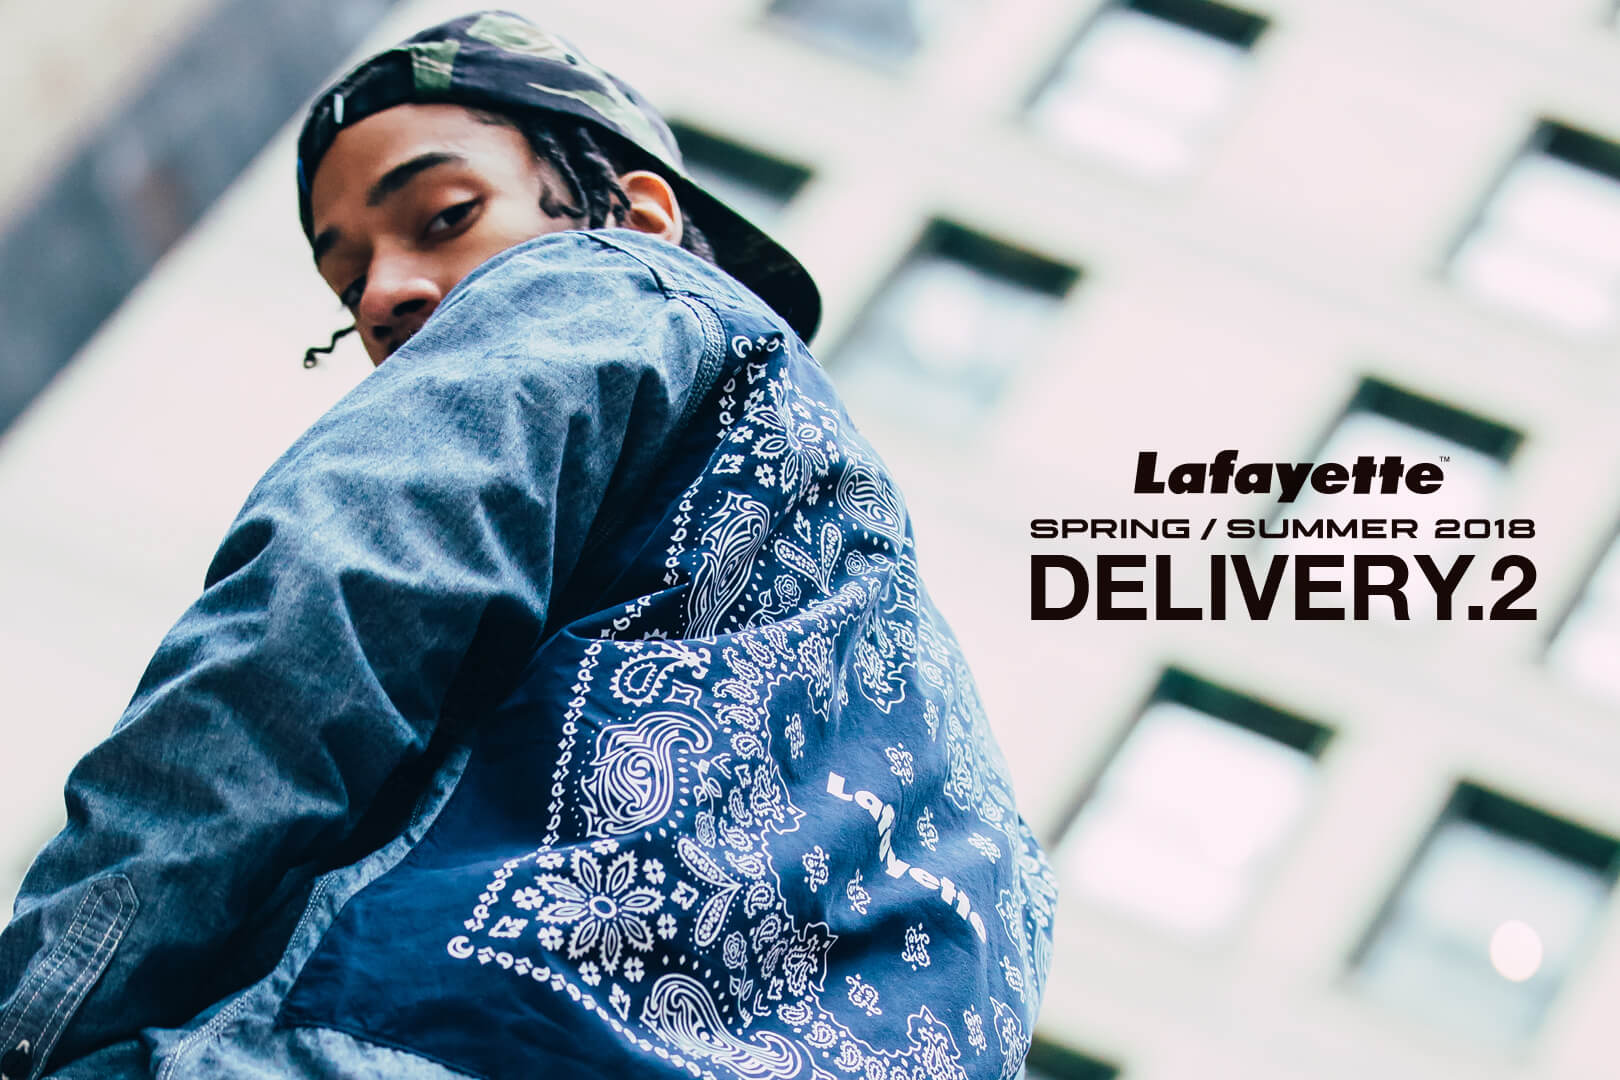 Lafayette 18 Spring Summer Collection Delivery 2 Lafayette Blog ラファイエット ブログ